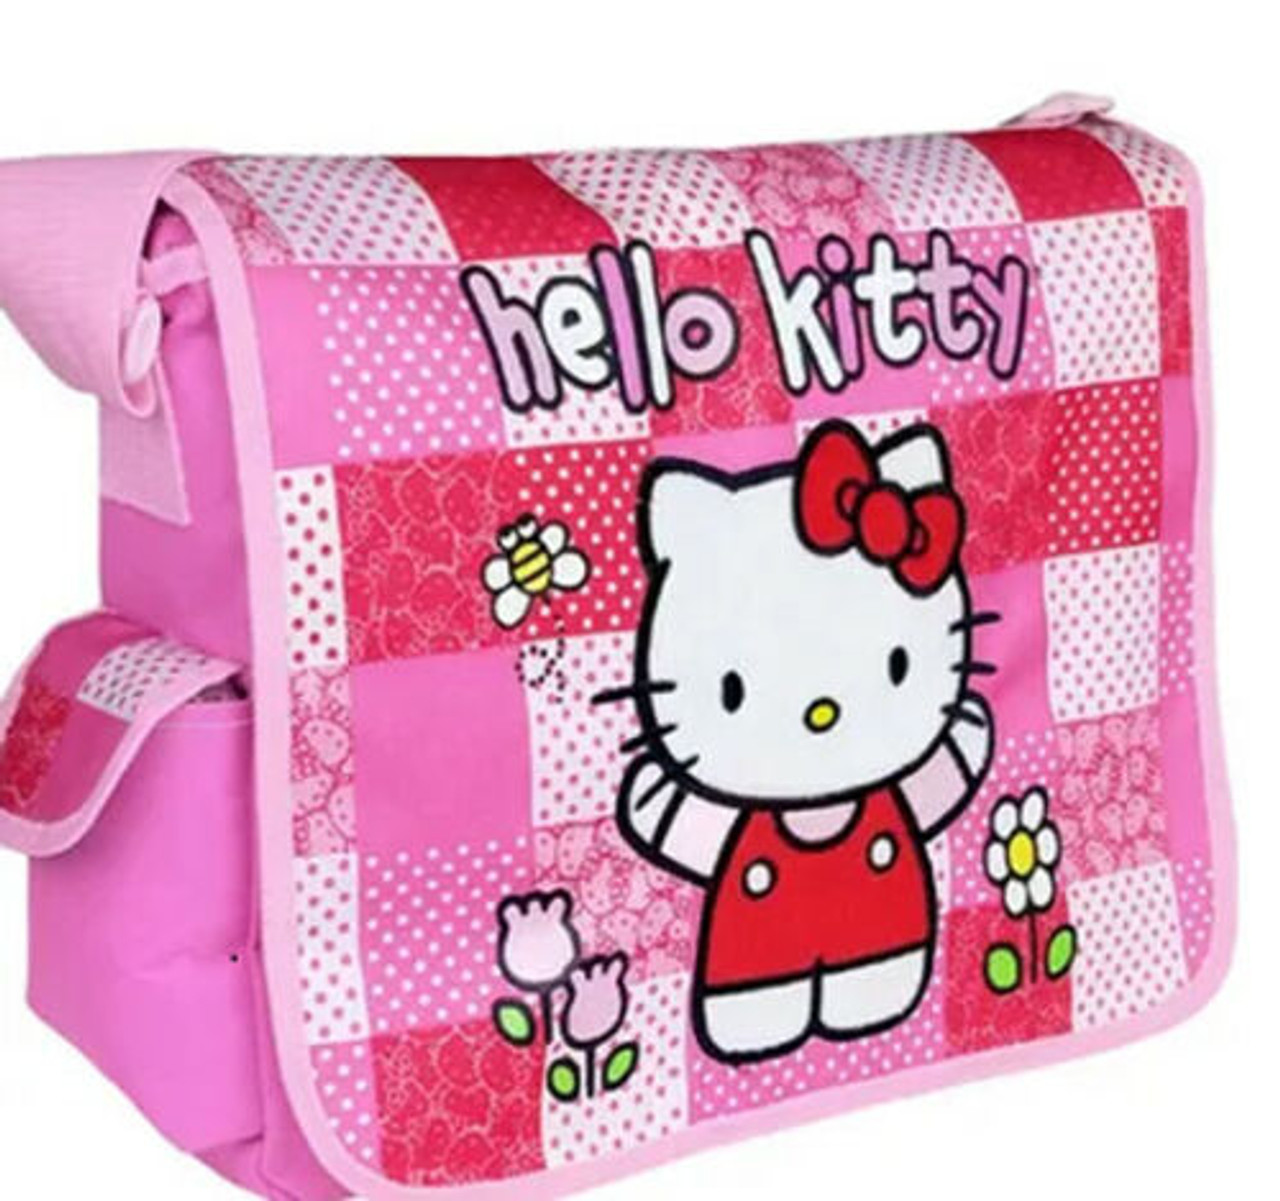 Hello Kitty Messenger Bag - Black with Pink Glitter